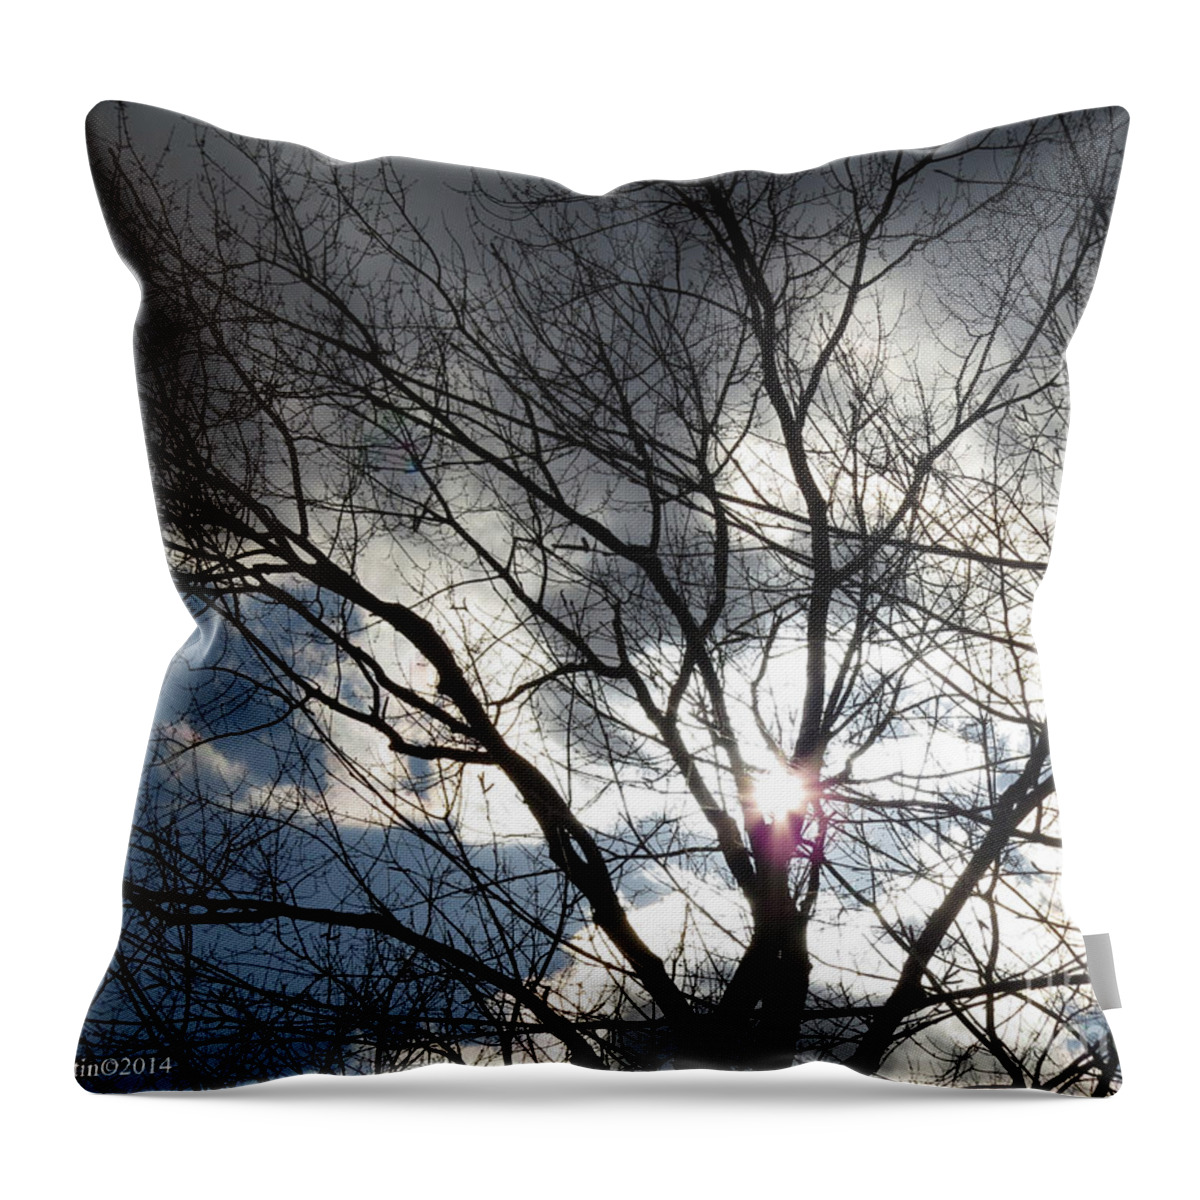 Clouds Throw Pillow featuring the photograph Boundaries by Linda L Martin